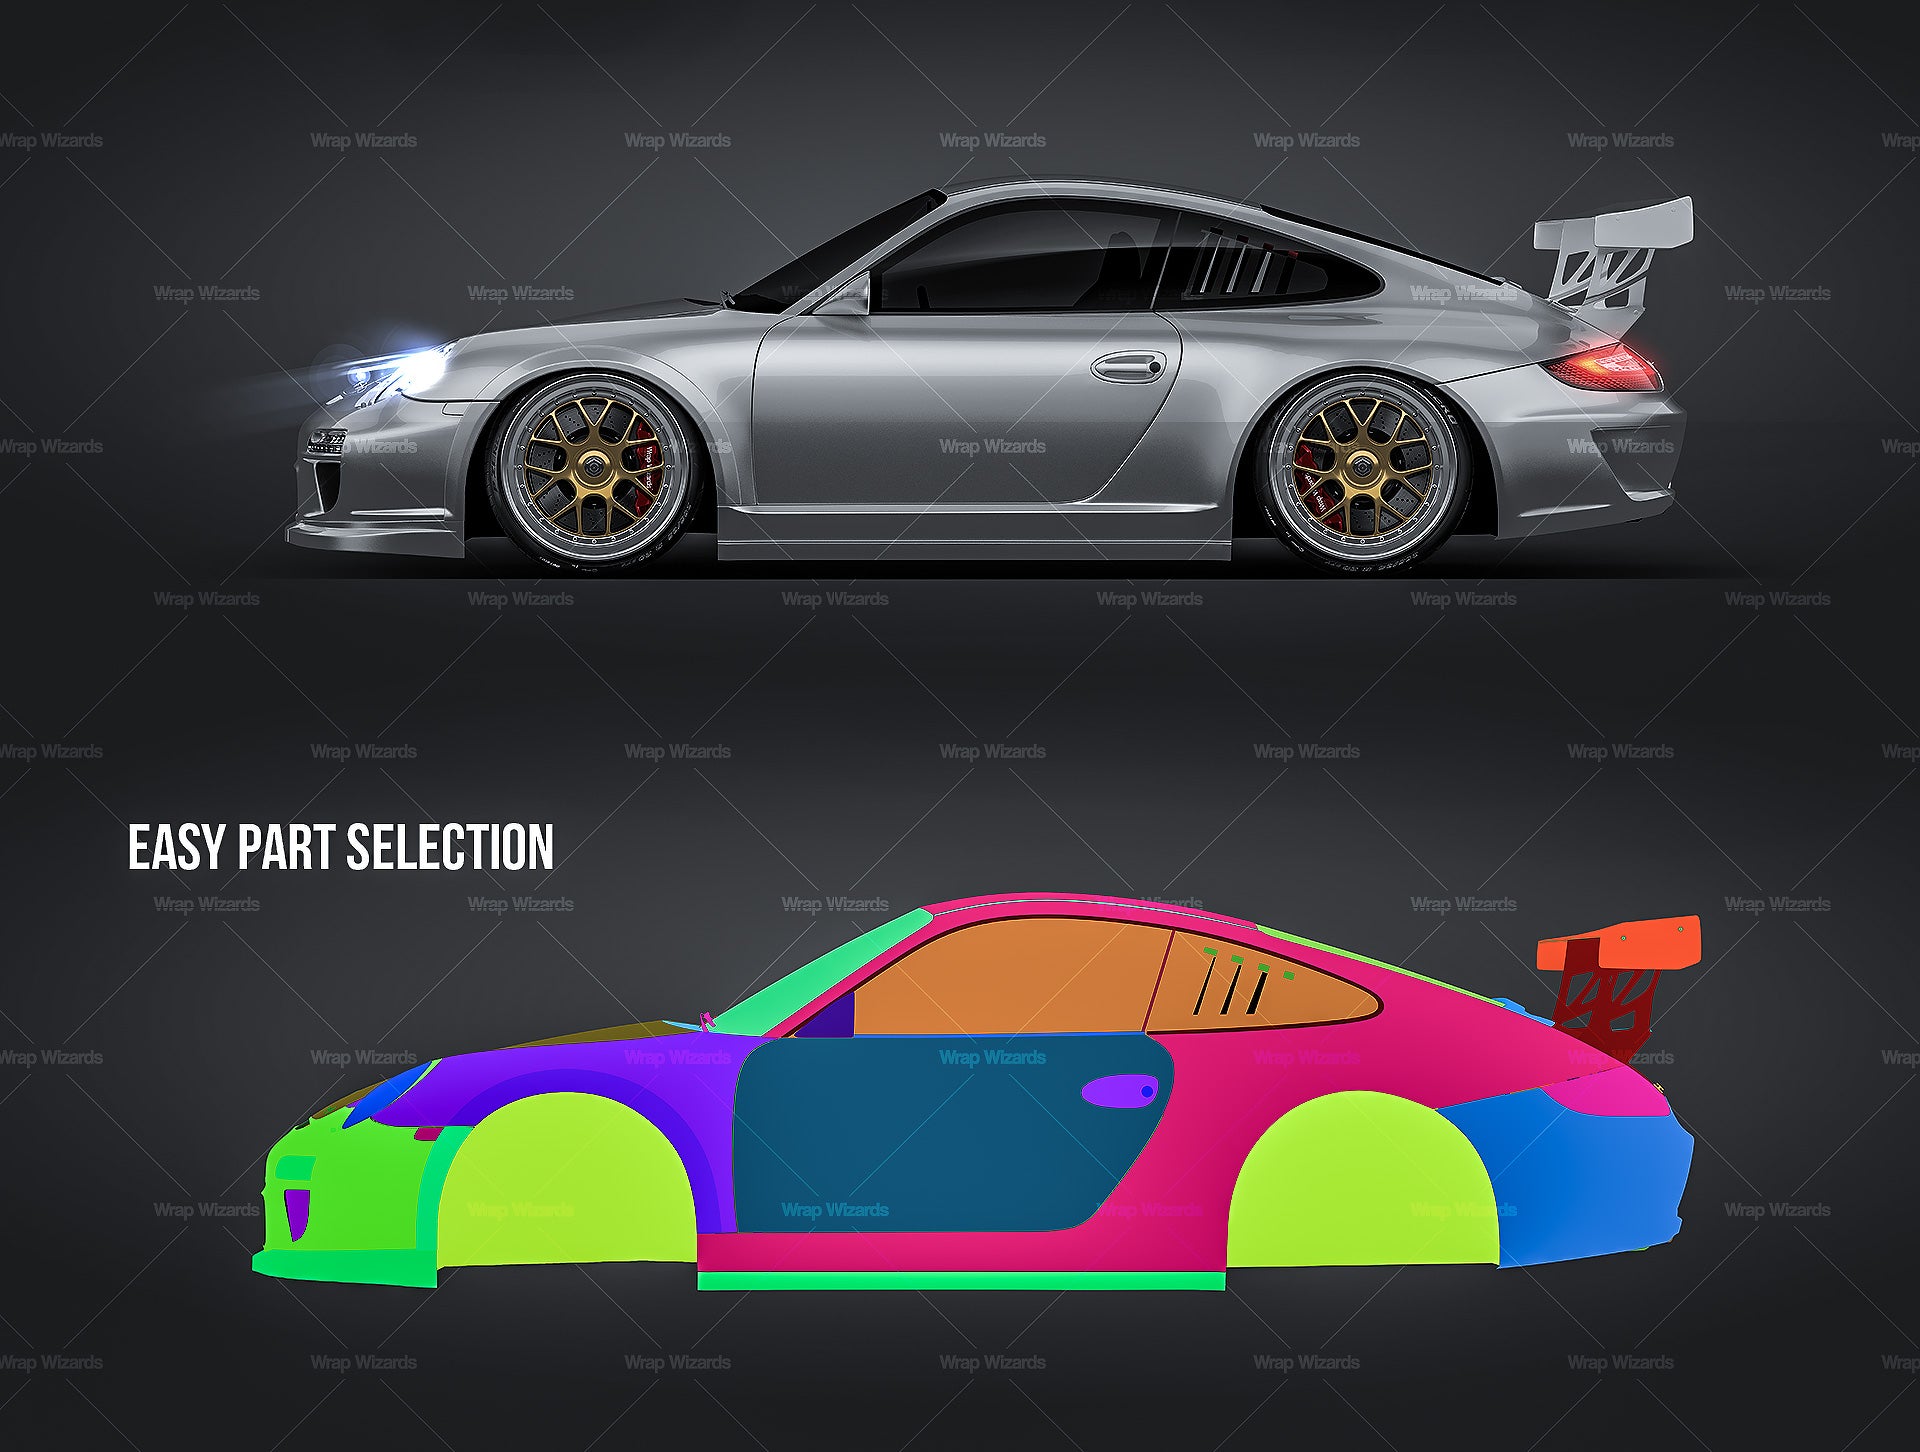 Porsche 911 997.2 GT3 Cup Racing 2011 glossy finish - all sides Car Mockup Template.psd